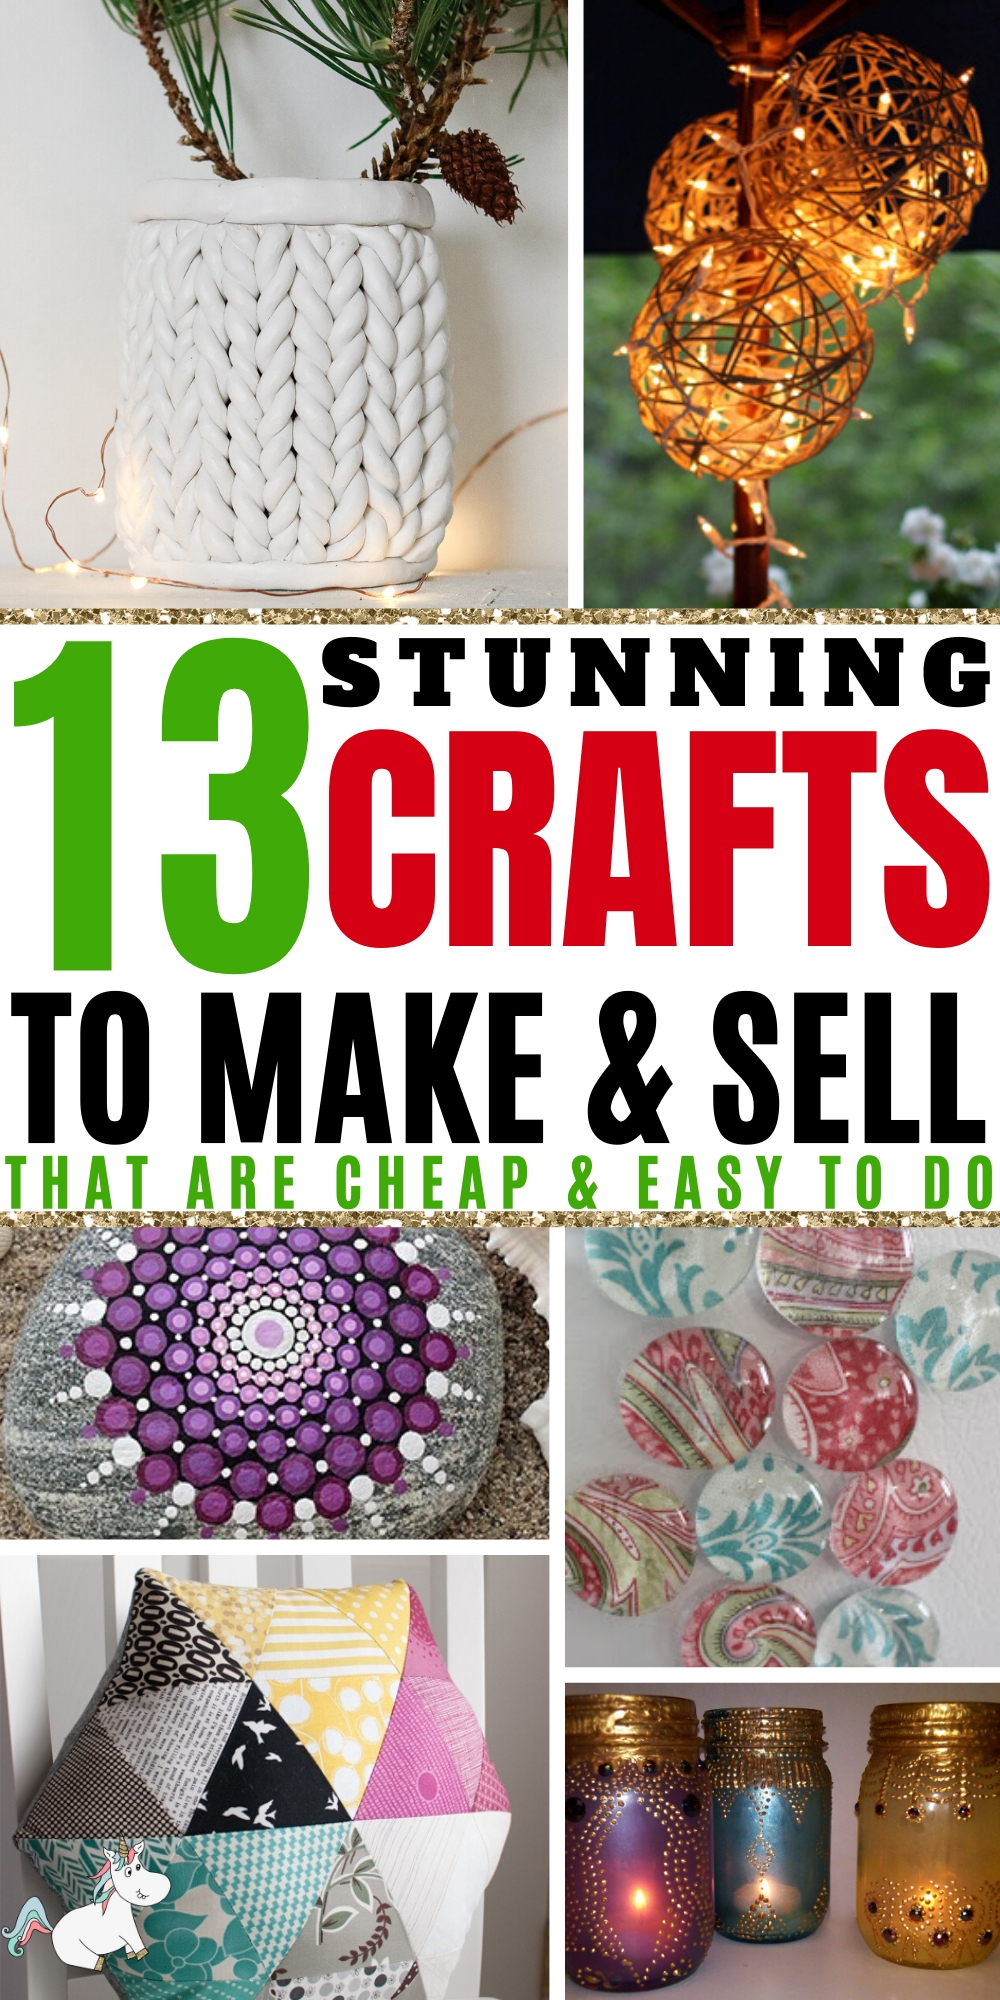 13 Easy Crafts To Make And Sell For Extra Money in 2019 | The Mummy Front